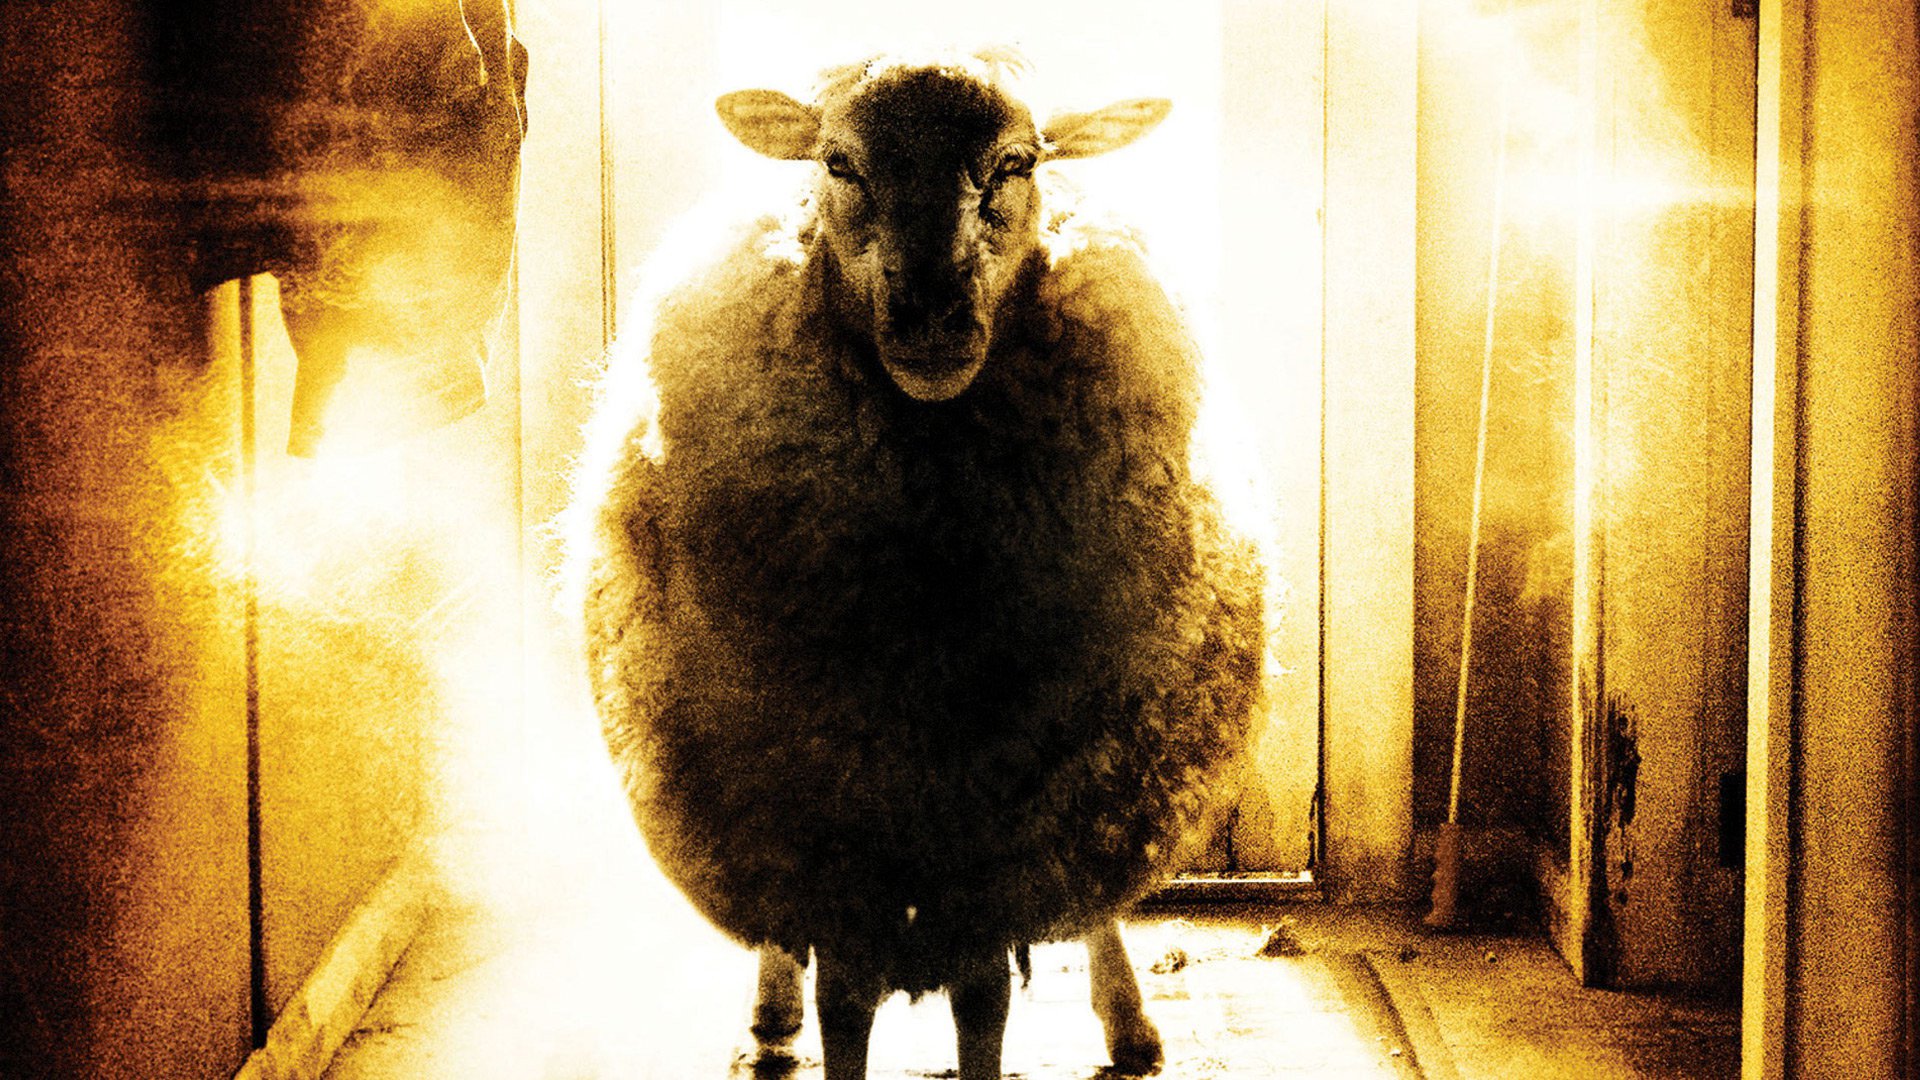 Black Sheep Posters Wallpaper Trailers Prime Movies